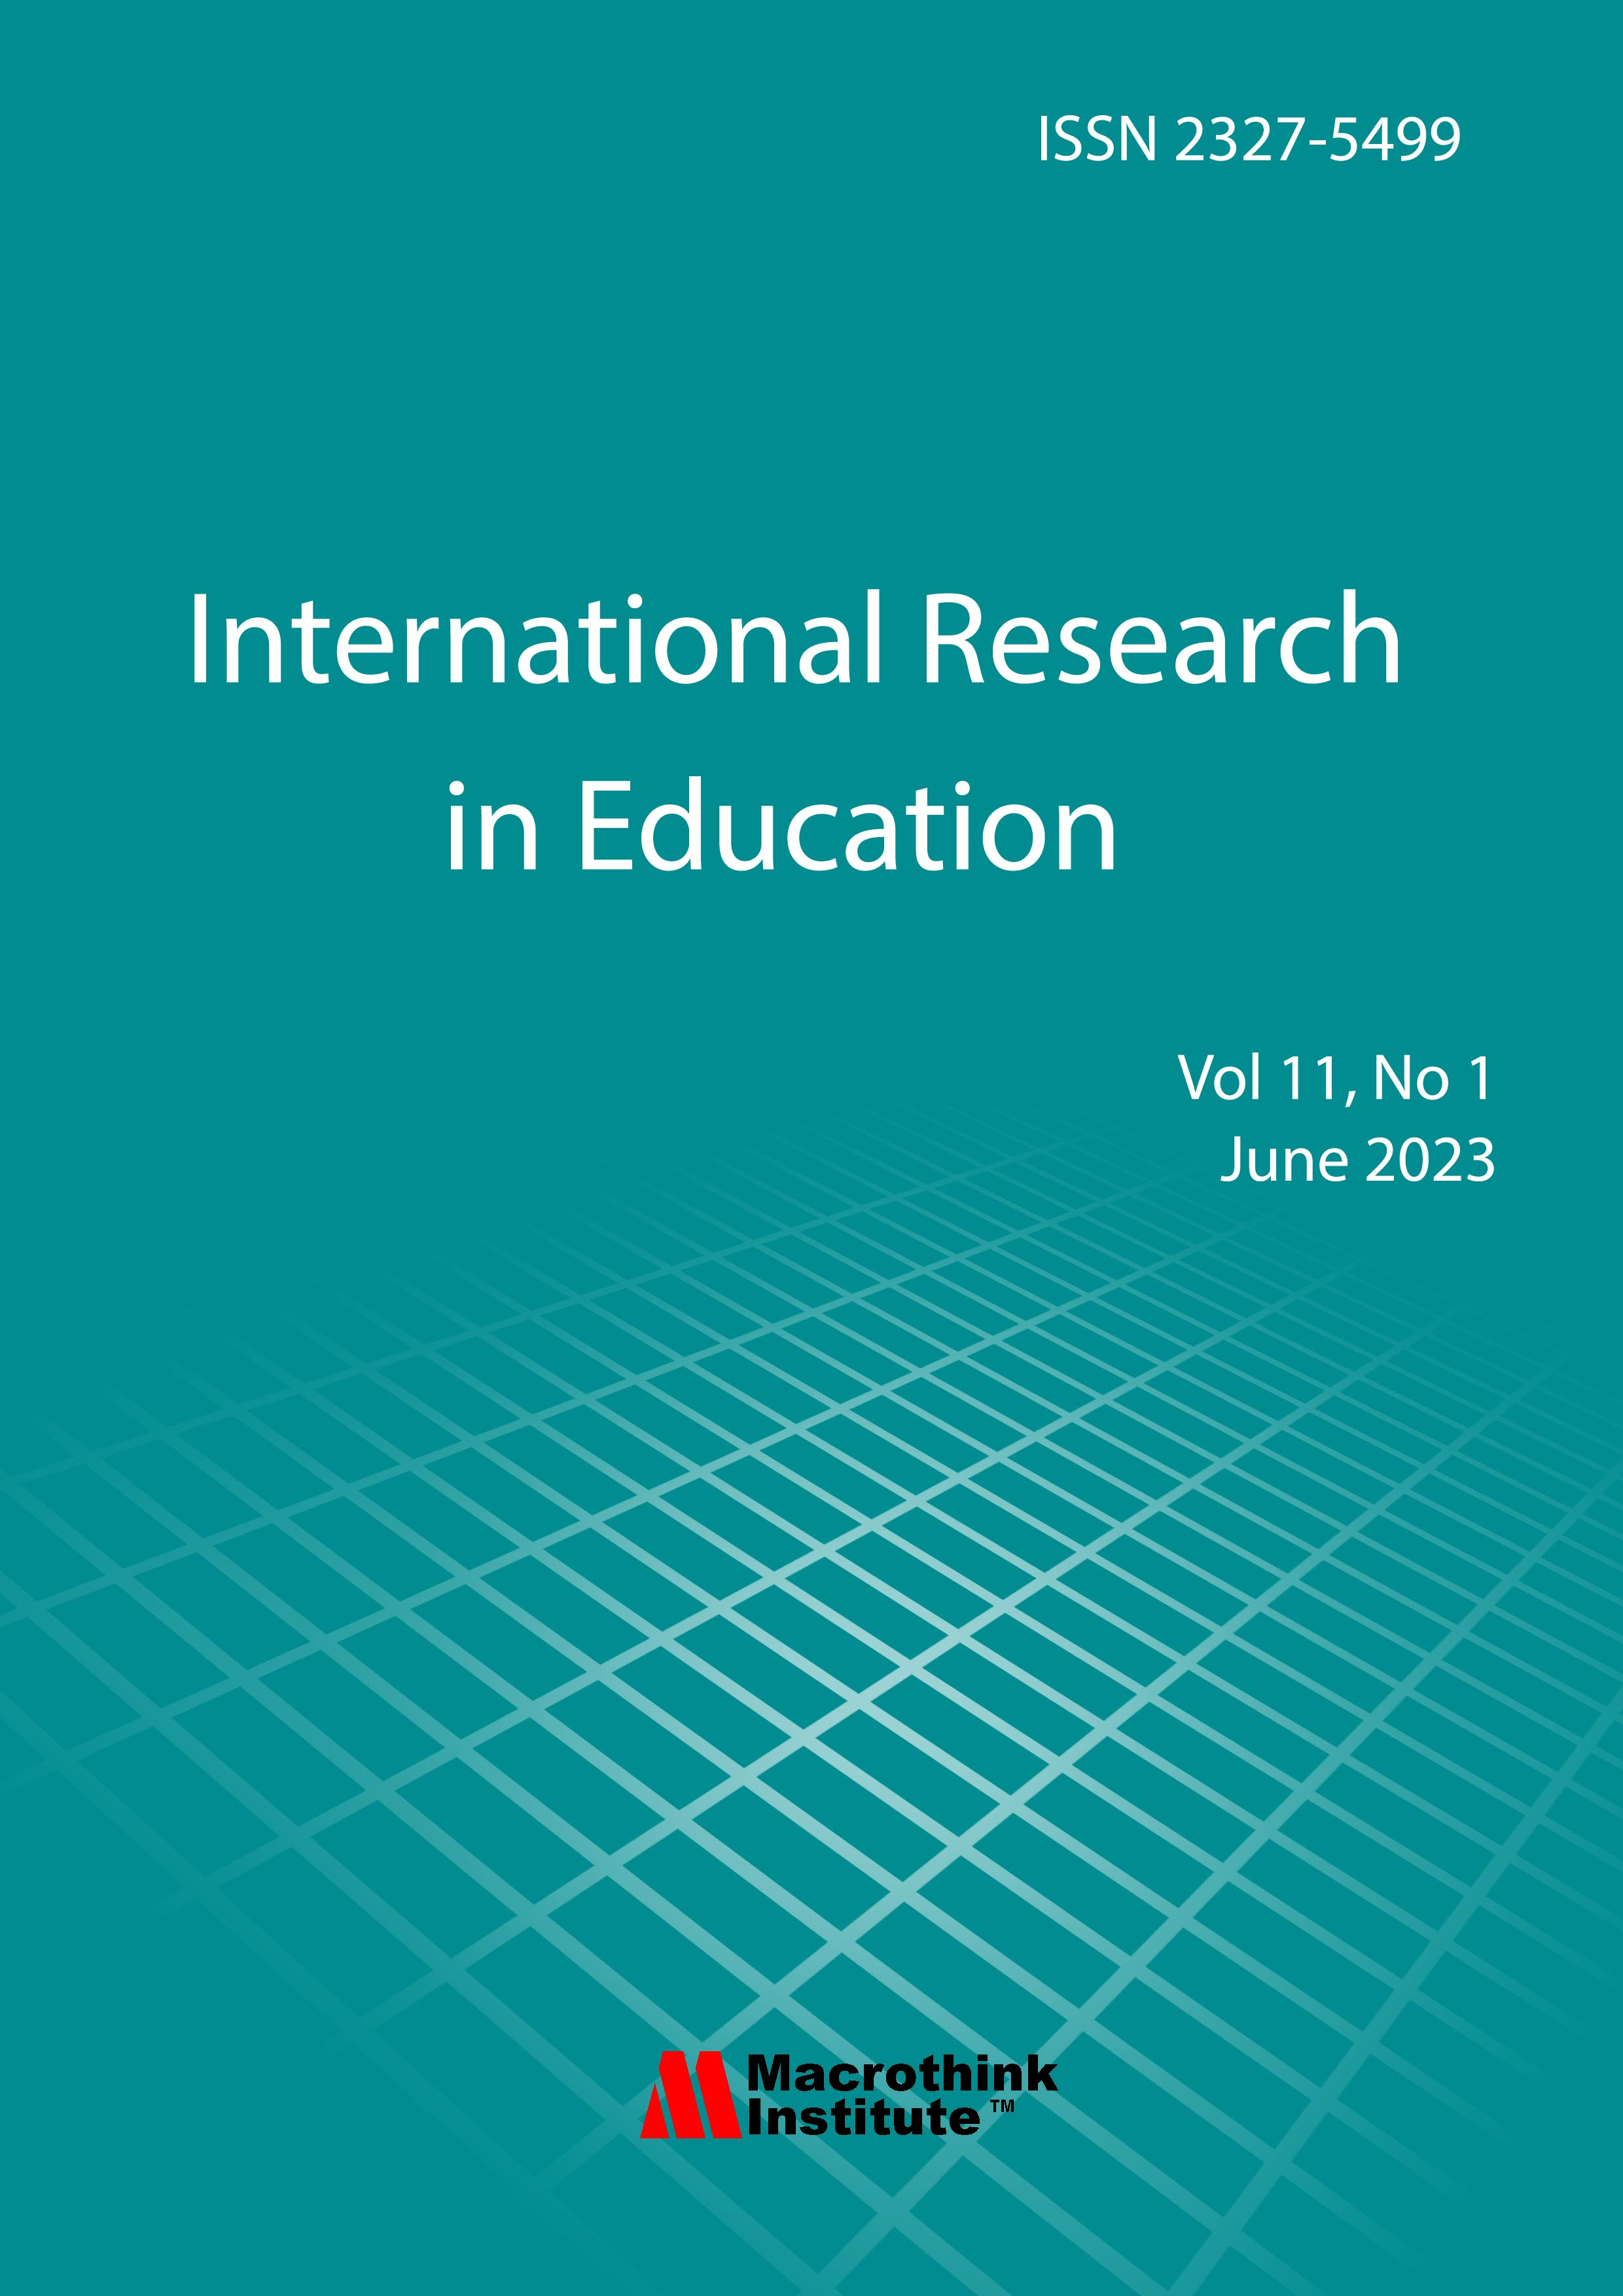 international journal of educational research and review